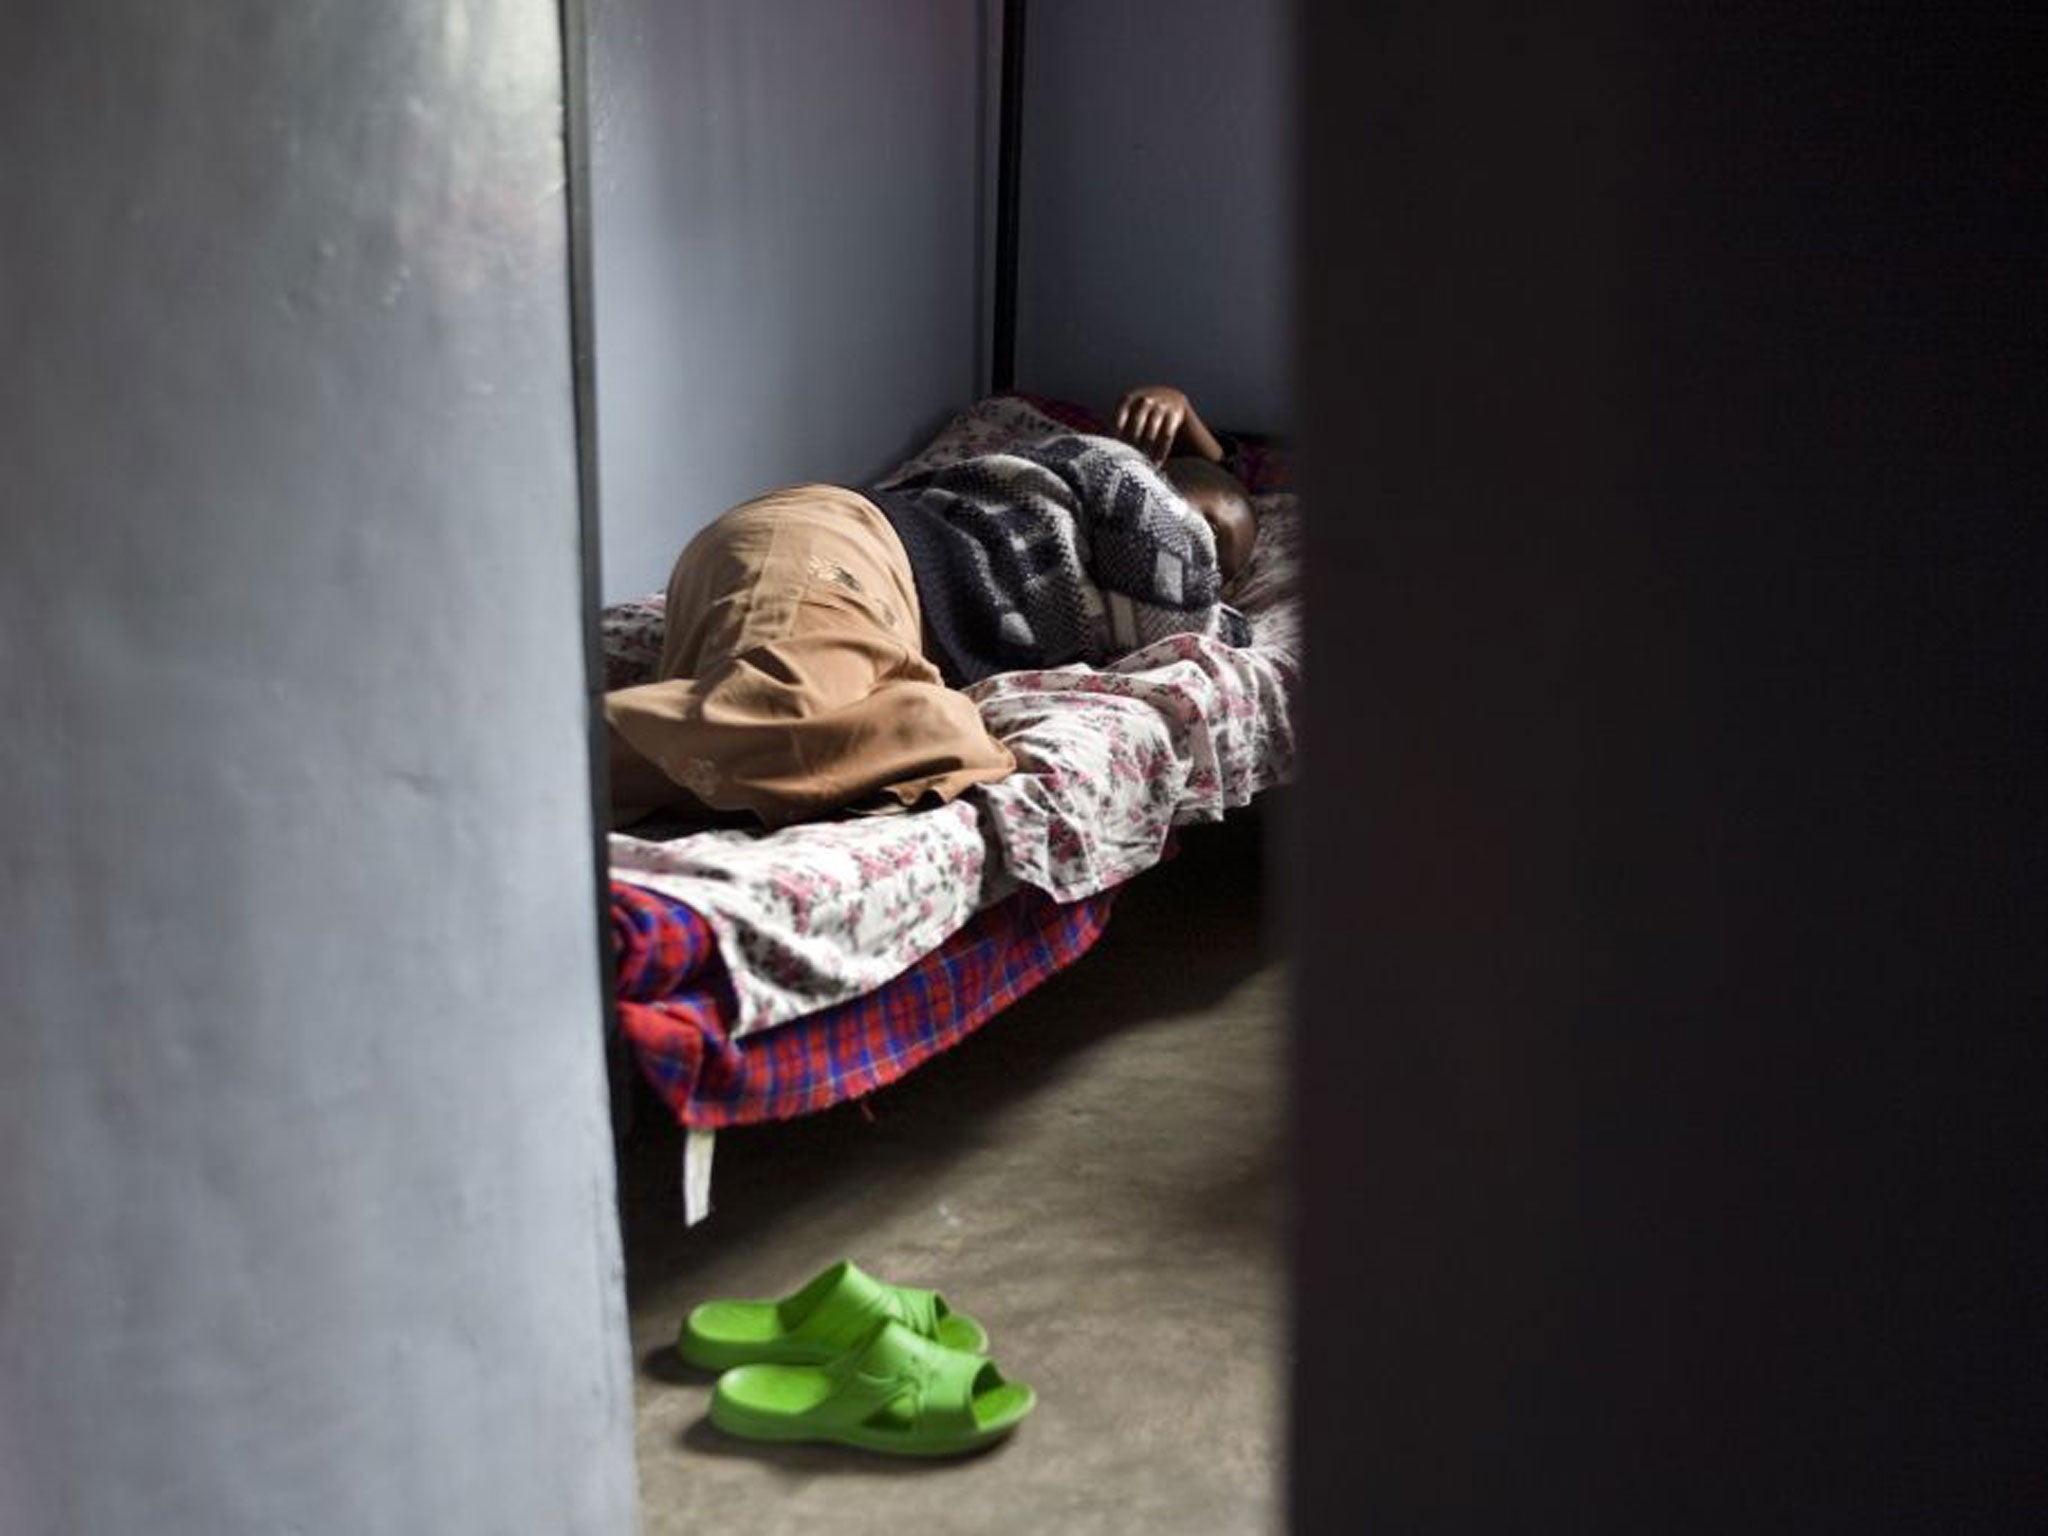 A 17-year-old in a safehouse in Nairobi, Kenya, after fleeing from the threat of mutilation